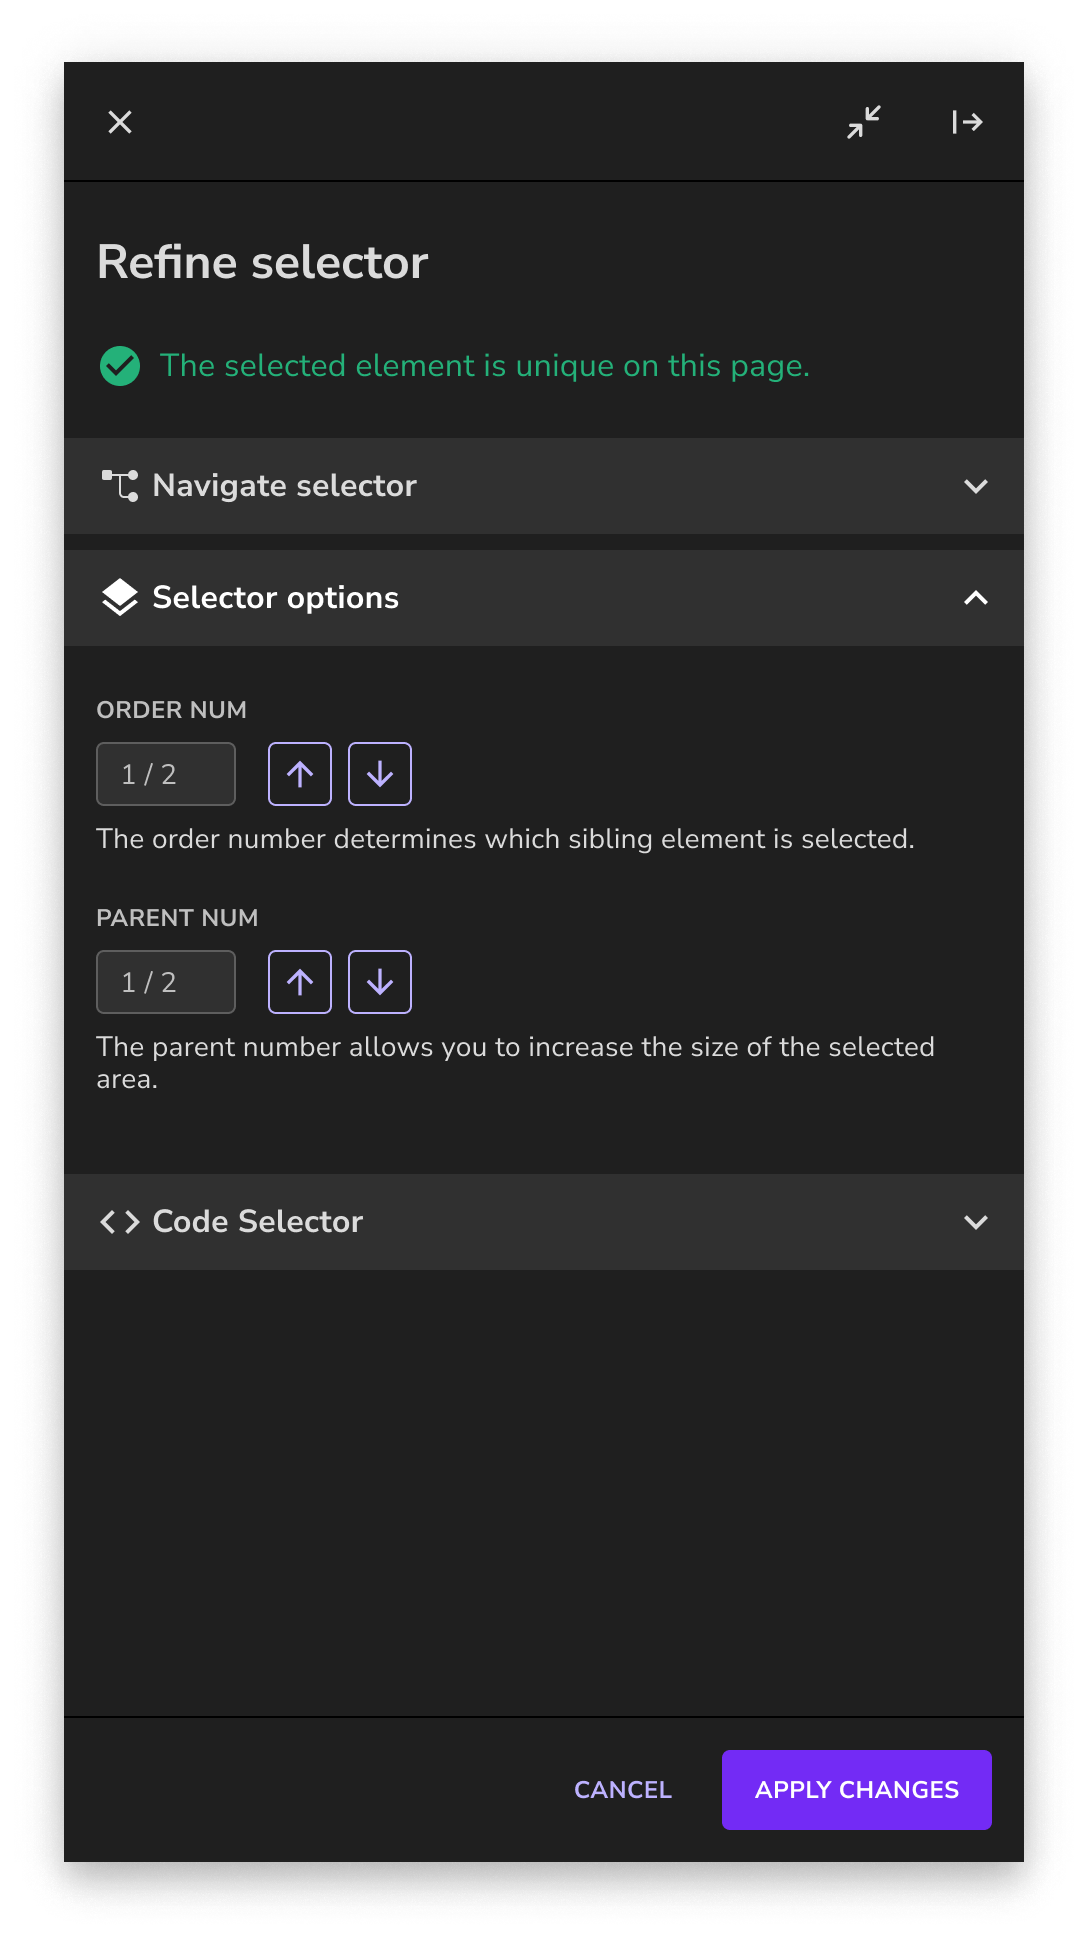 Refine selector section of the Userlane editor showing all options